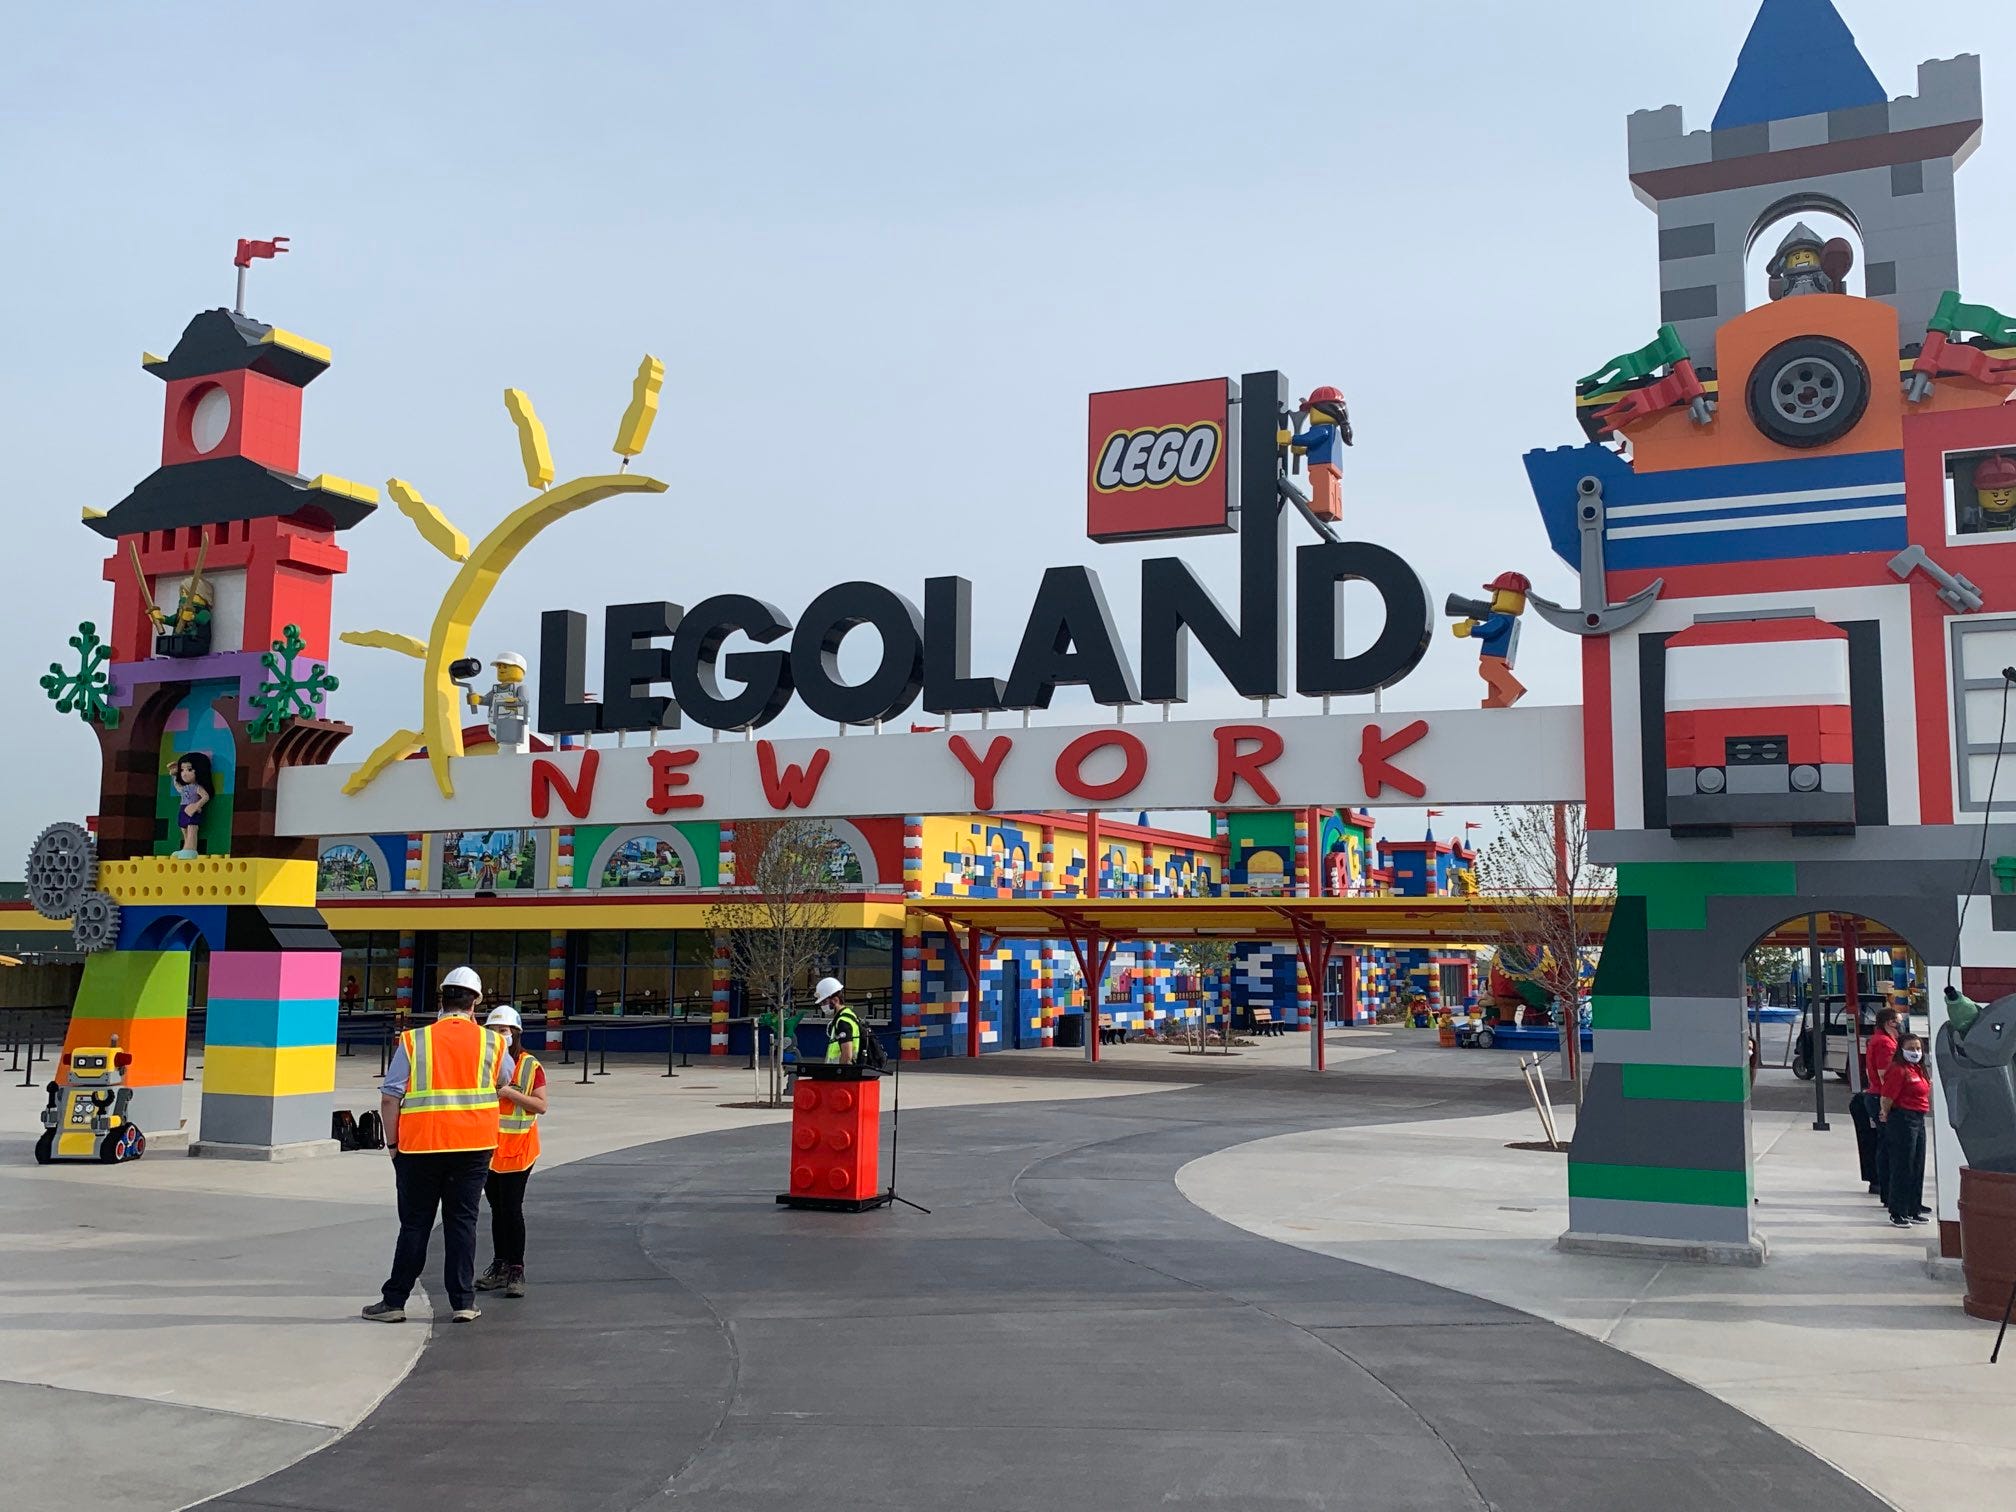 Legoland New York: Get a first look inside the theme park opening this summer